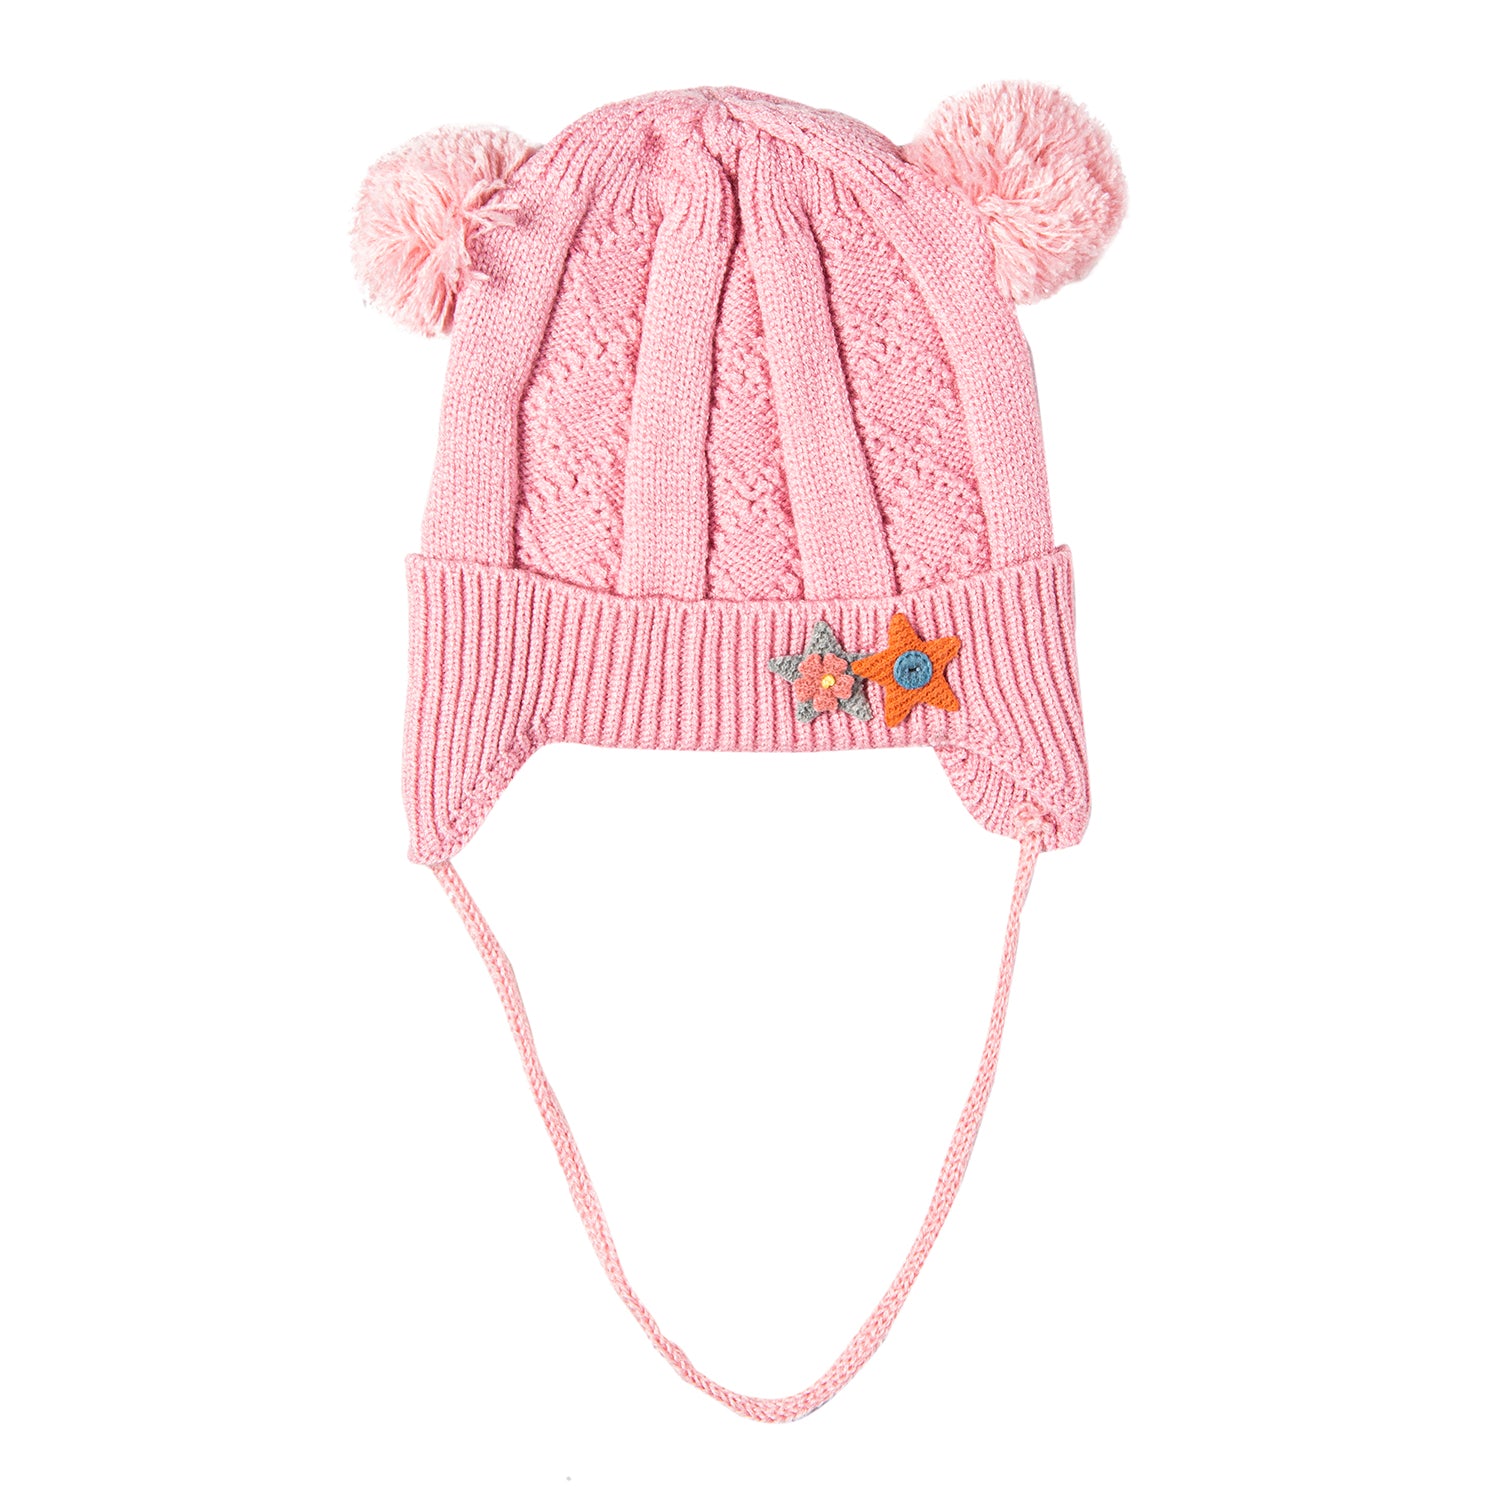 Knit Woollen Cap With Tie For Ear Cover Starry Pom Pom Pink - Baby Moo